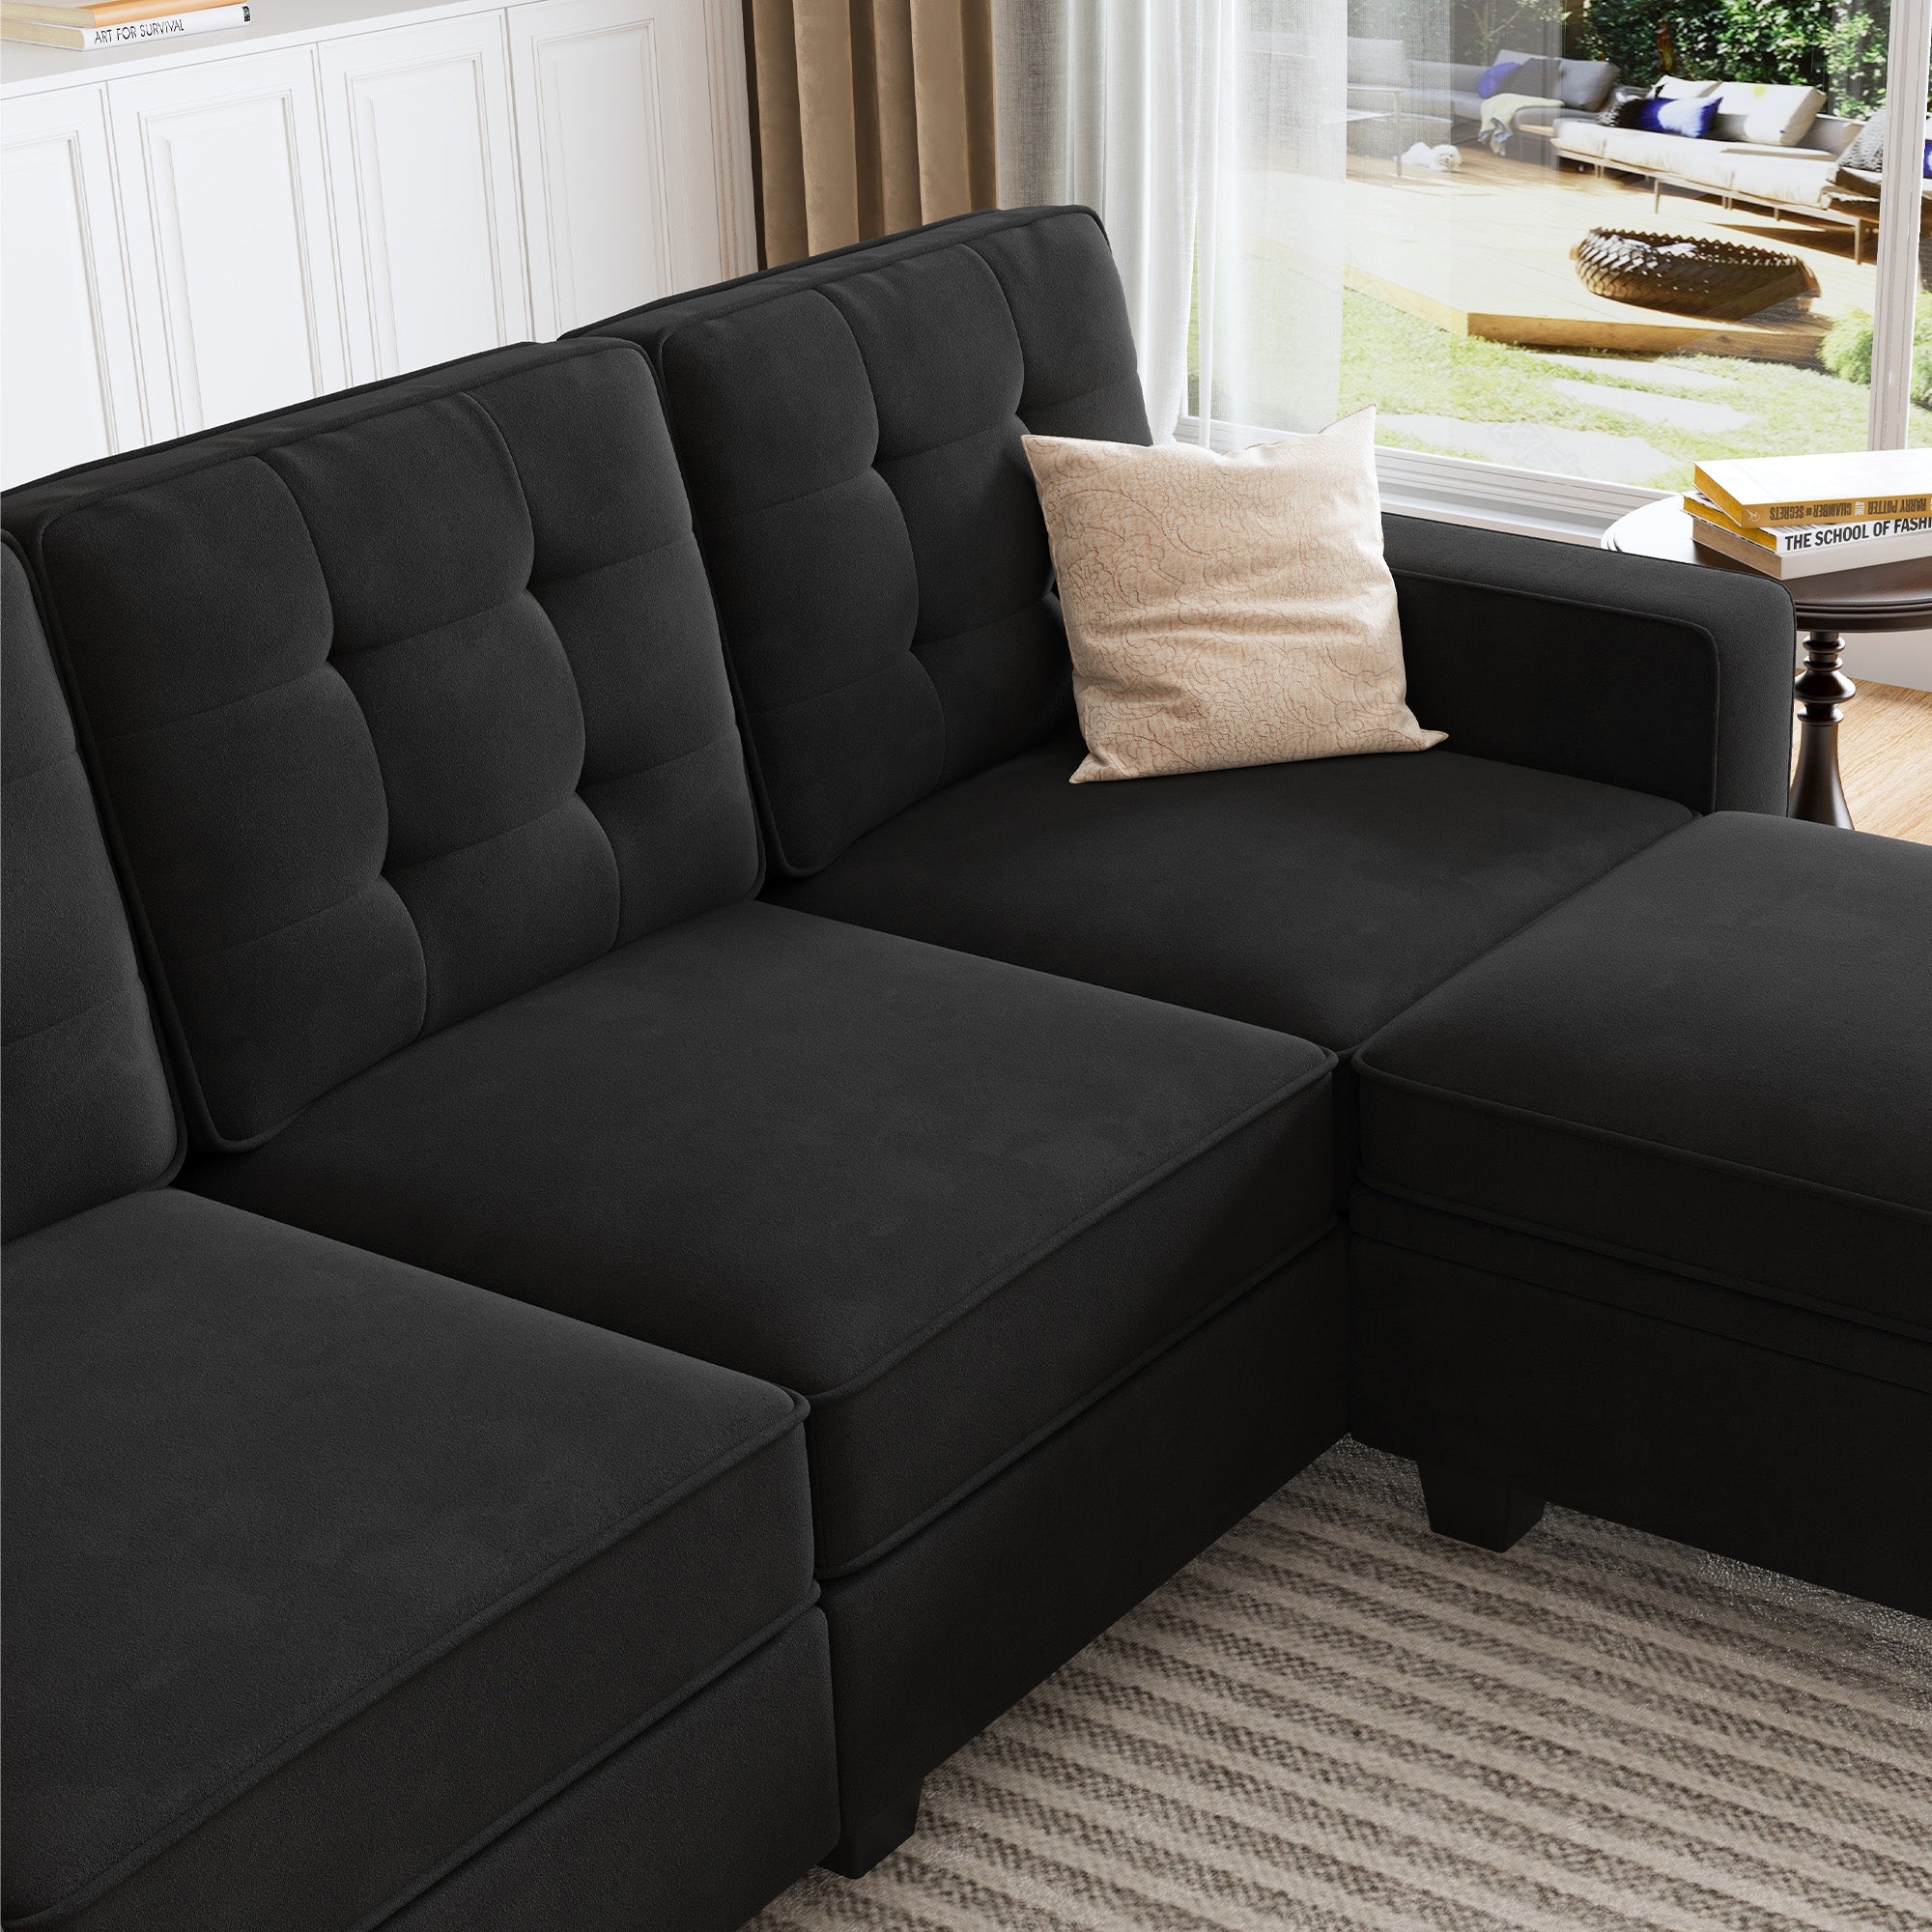 HONBAY 6-Piece Velvet Convertible Sectional With Storage Ottoman